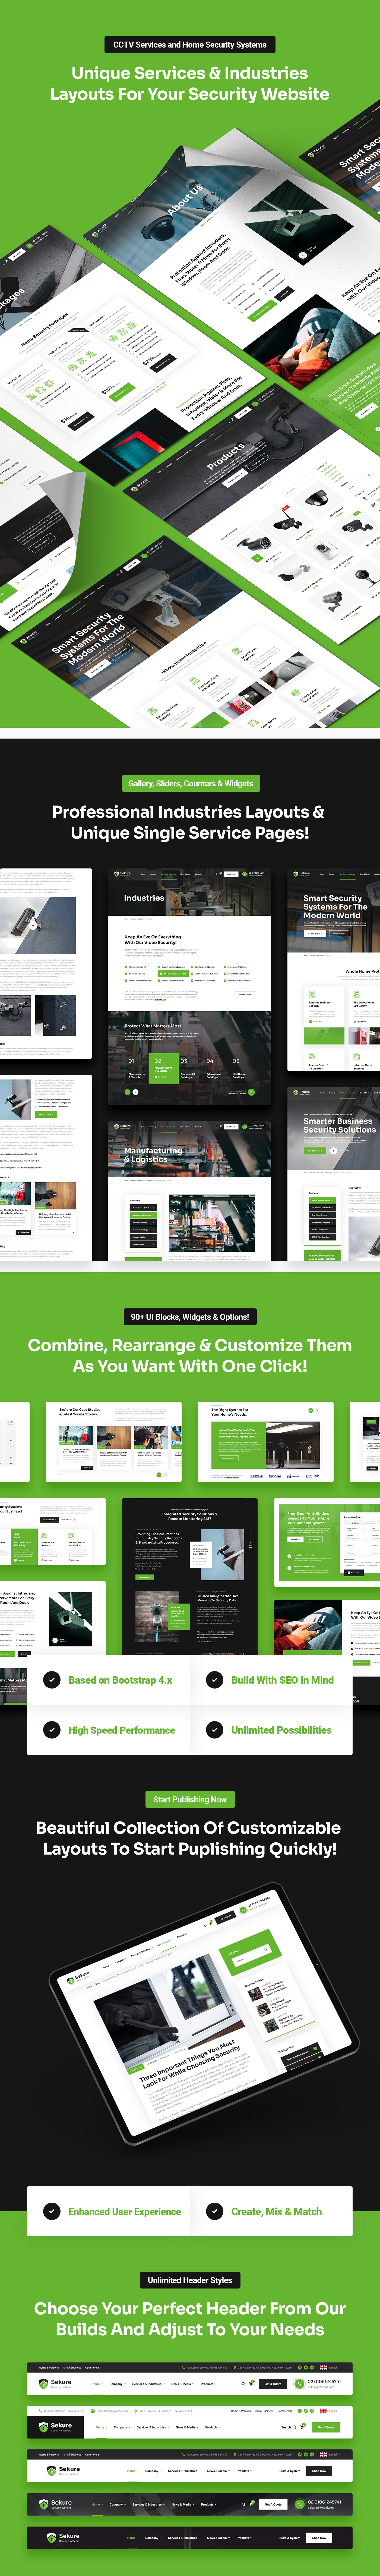 Sekure - CCTV and Security Systems HTML5 Template - 6